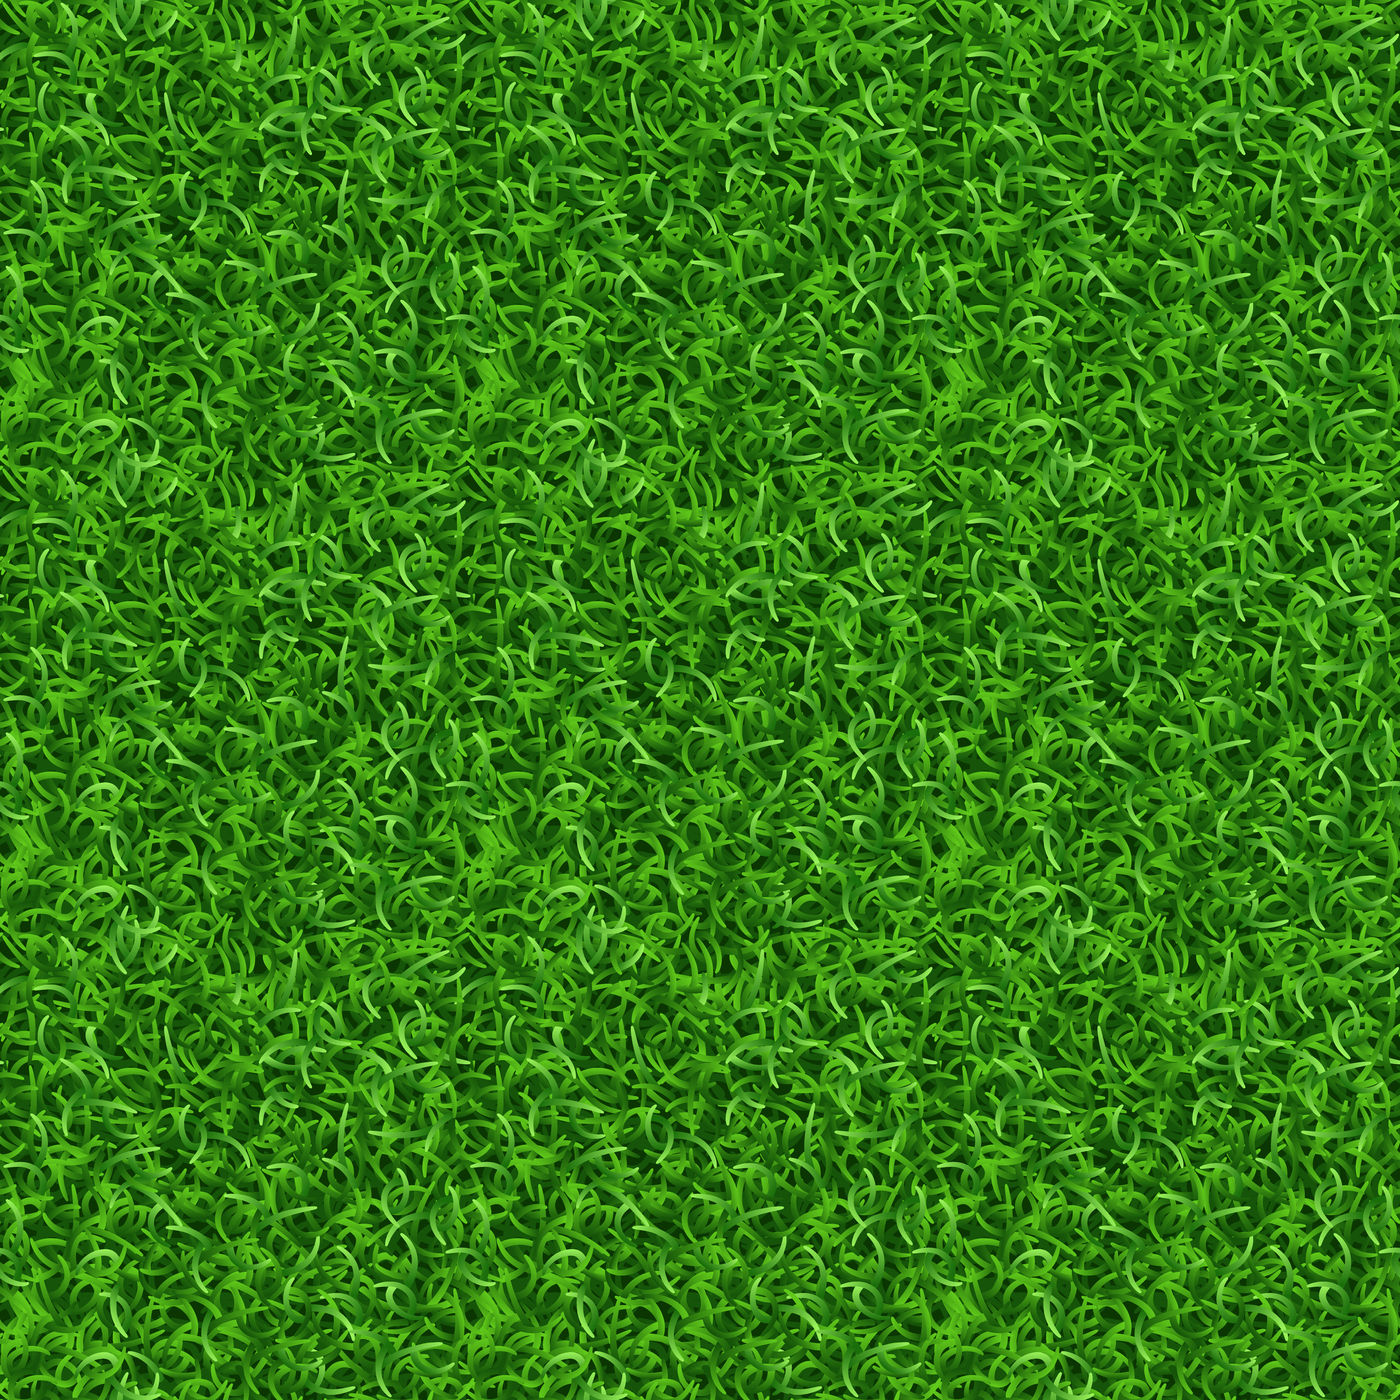 Seamless Grass Vector Texture By Microvector Thehungryjpeg 